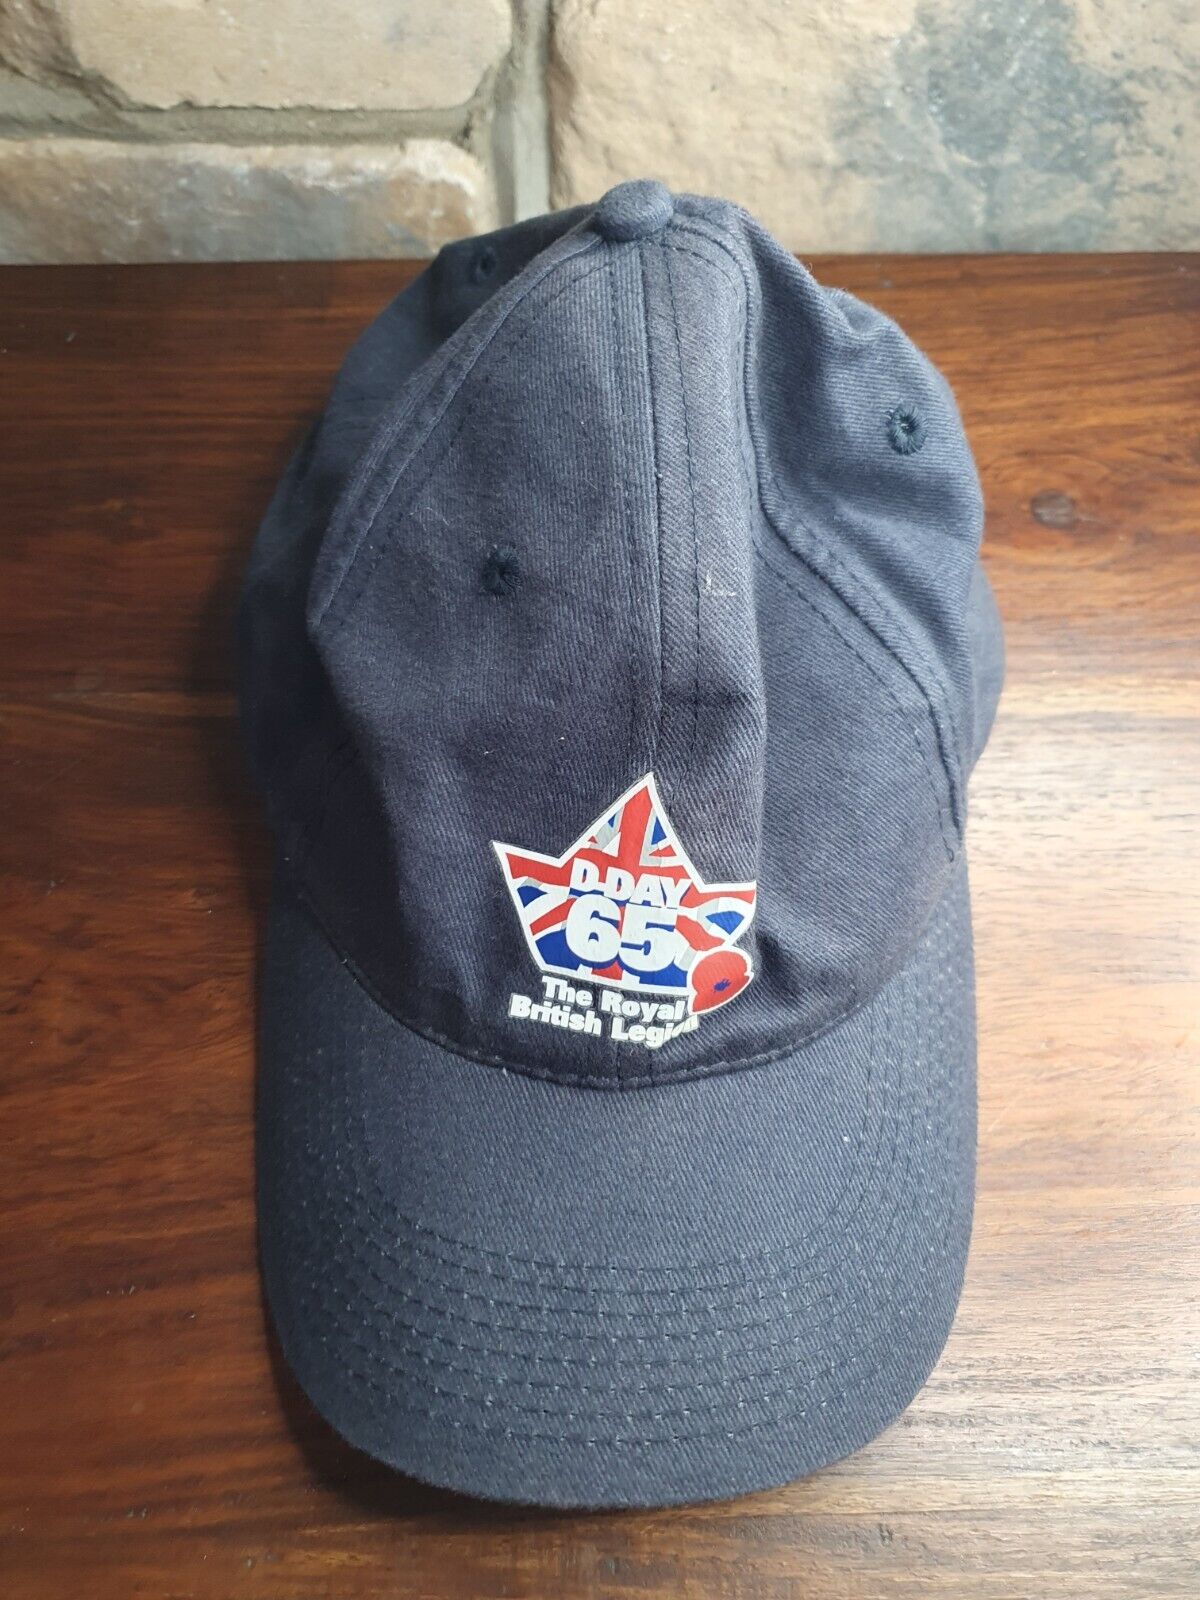 Collectable D-Day 65th Anniversary Cap - War, History